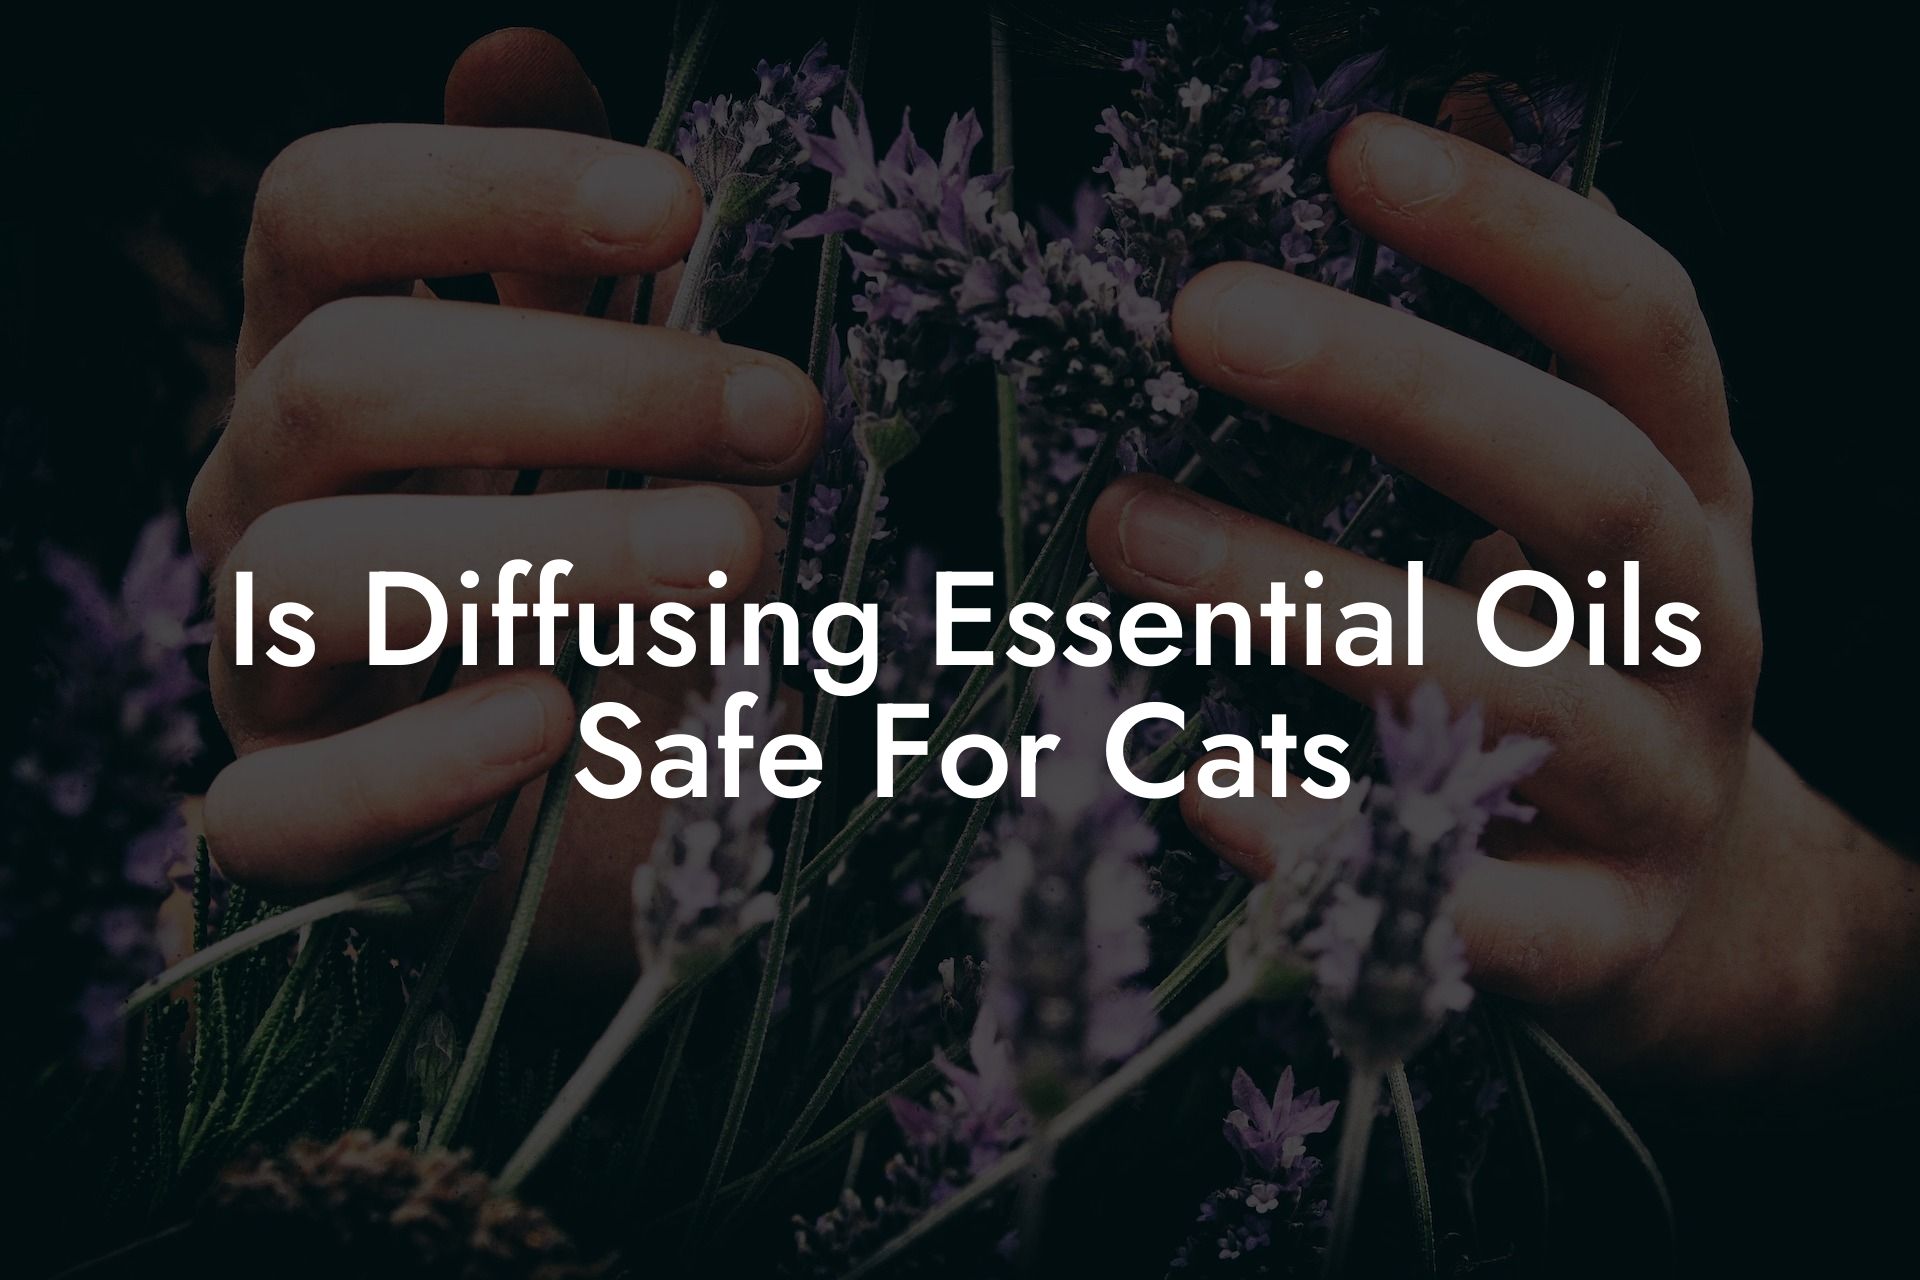 Is Diffusing Essential Oils Safe For Cats